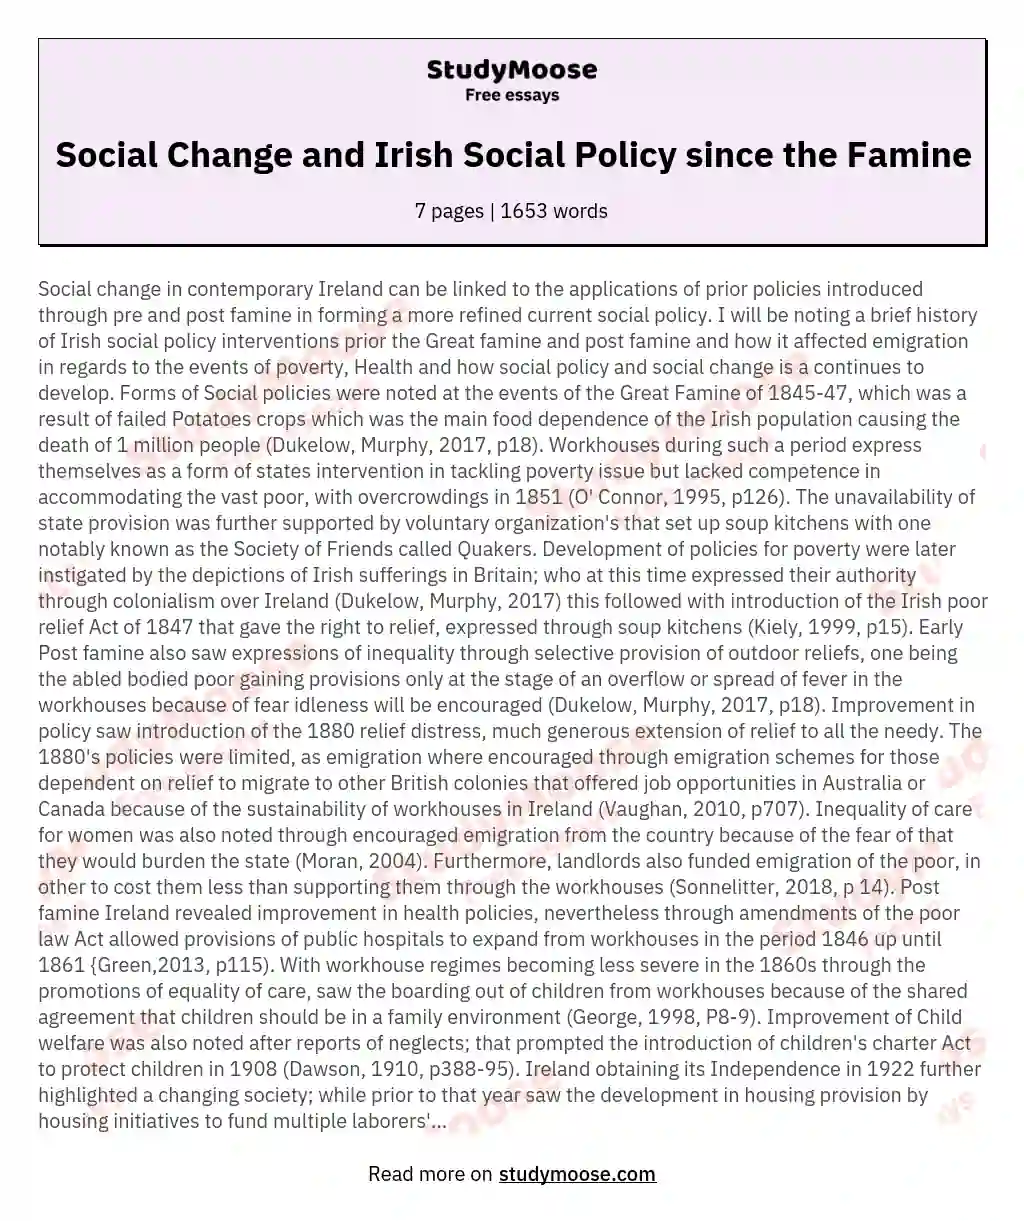 Social Change and Irish Social Policy since the Famine